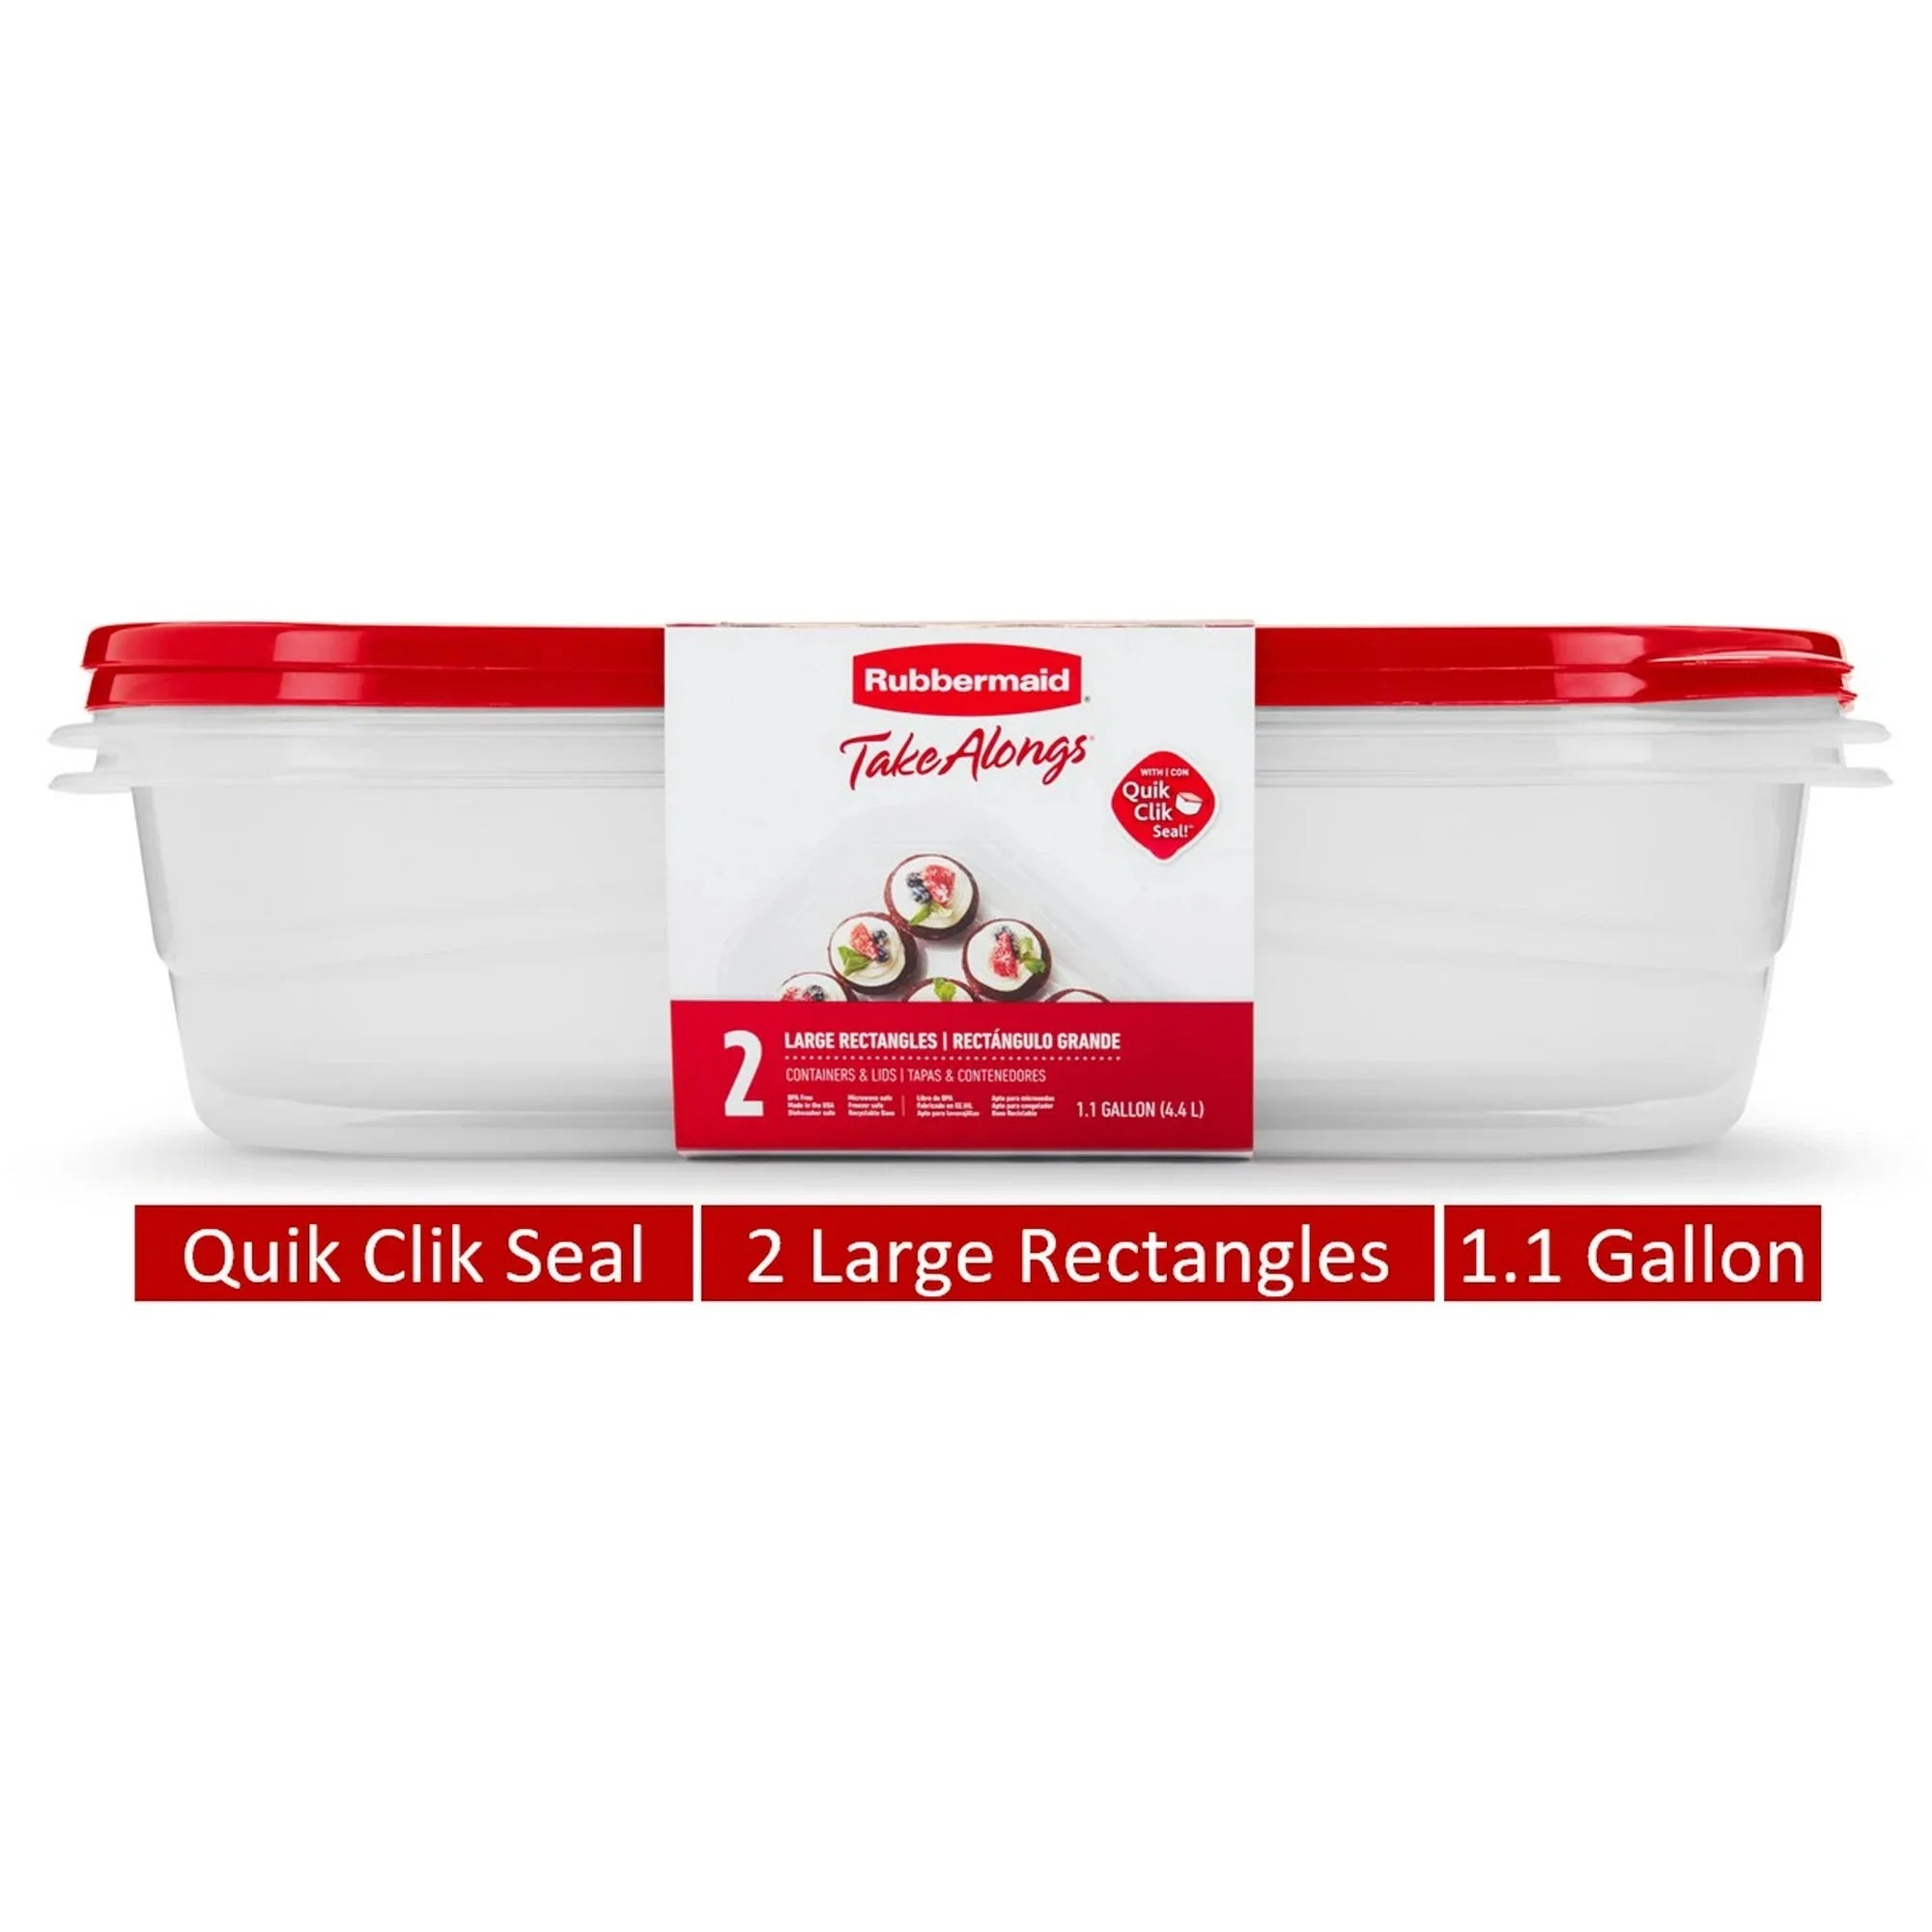 Wholesale prices with free shipping all over United States Rubbermaid TakeAlongs, 1 Gallon, 2 Packs, Red, Large Rectangular Plastic Food Storage Containers - Steven Deals